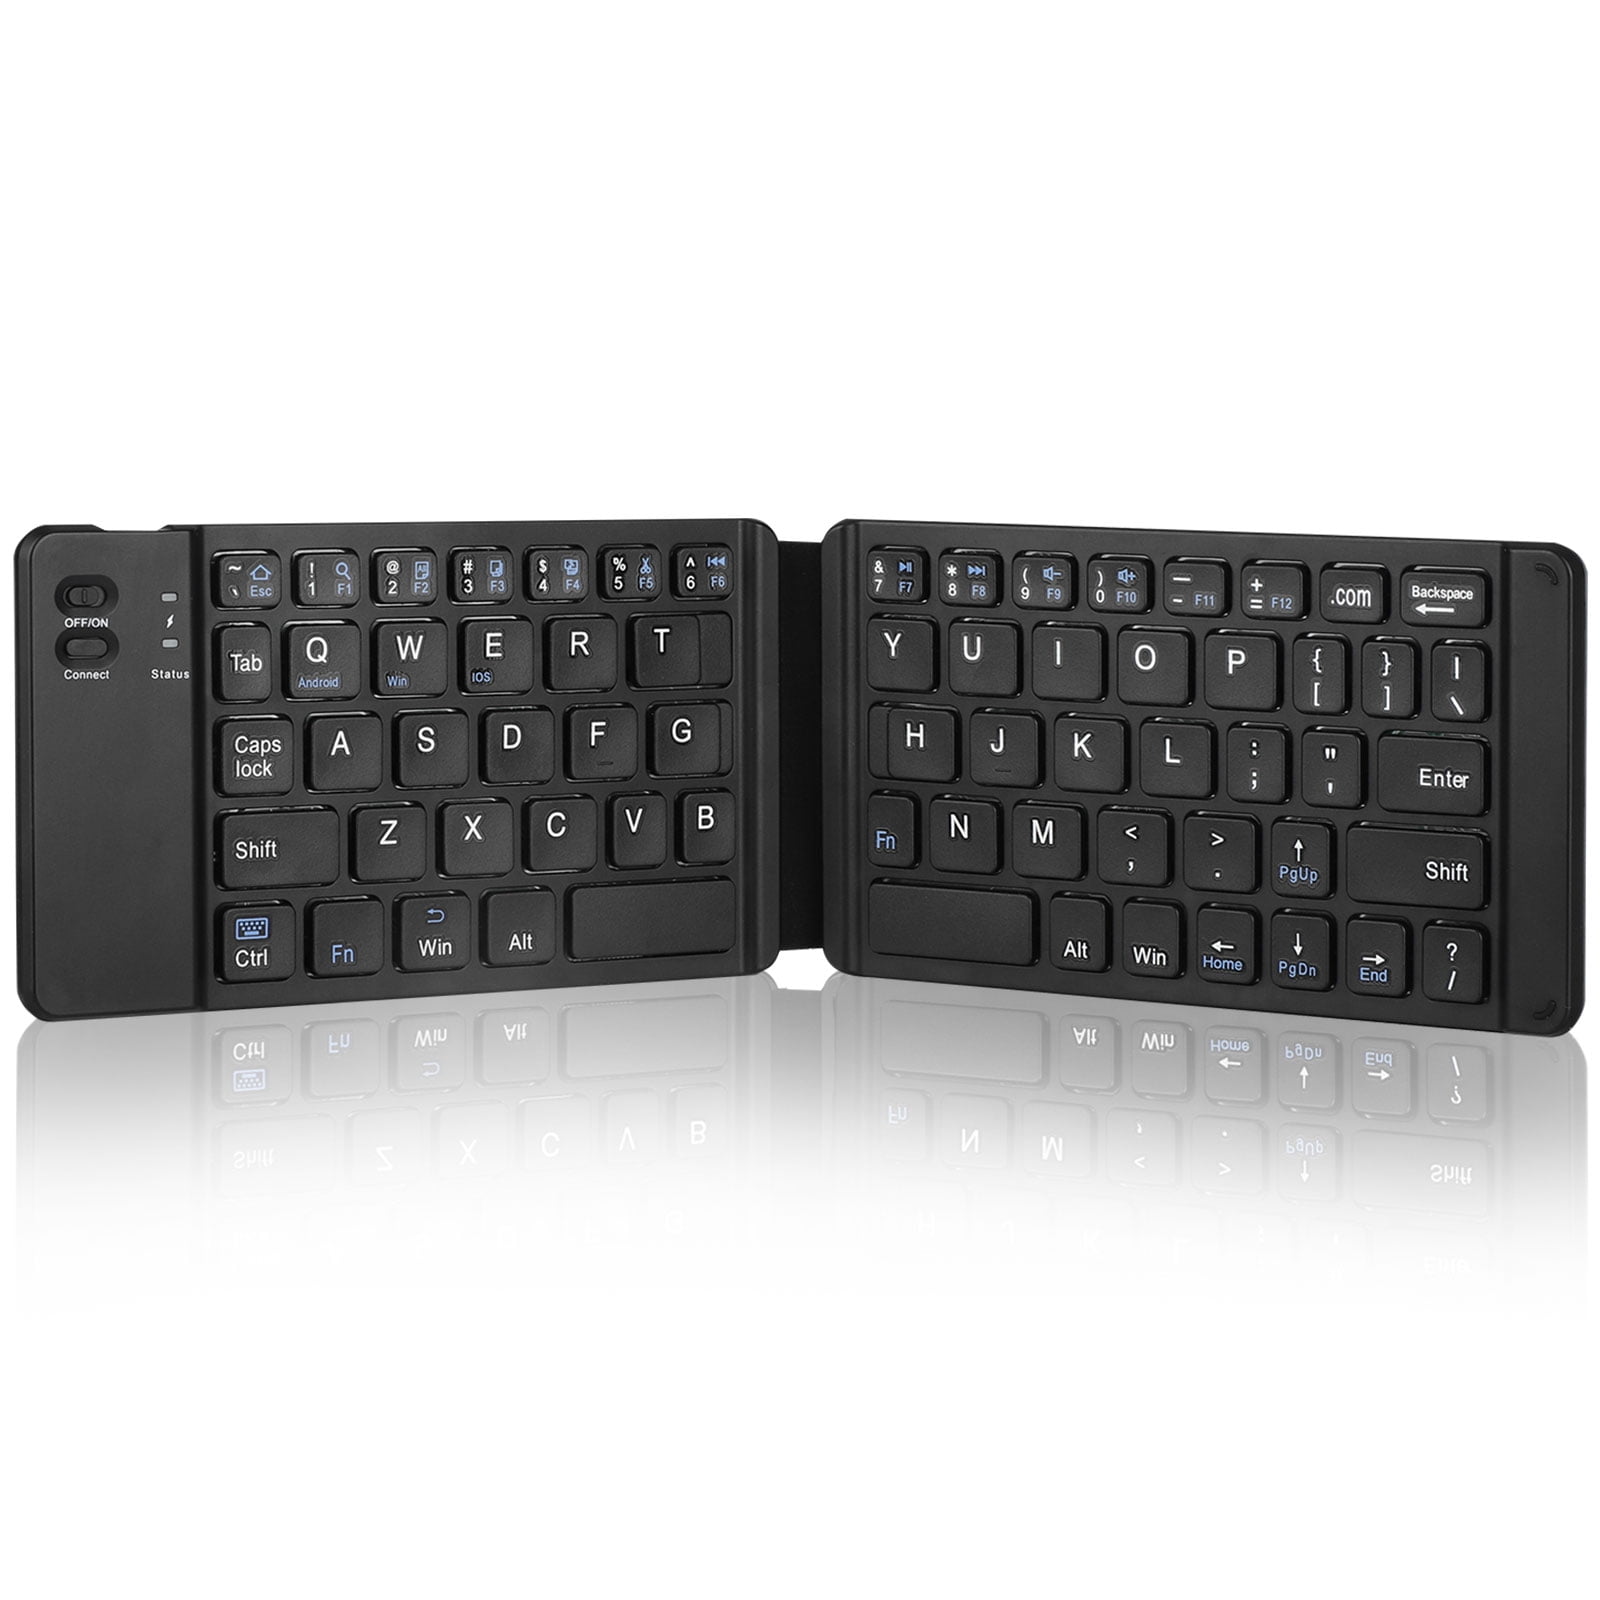 EVACH Bluetooth Folding Keyboard Foldable Bluetooth Keyboard Rechargable Full Size Foldable Keyboard Compatible con iOS iPhone Android Smartphone Tables Windows Laptop Black